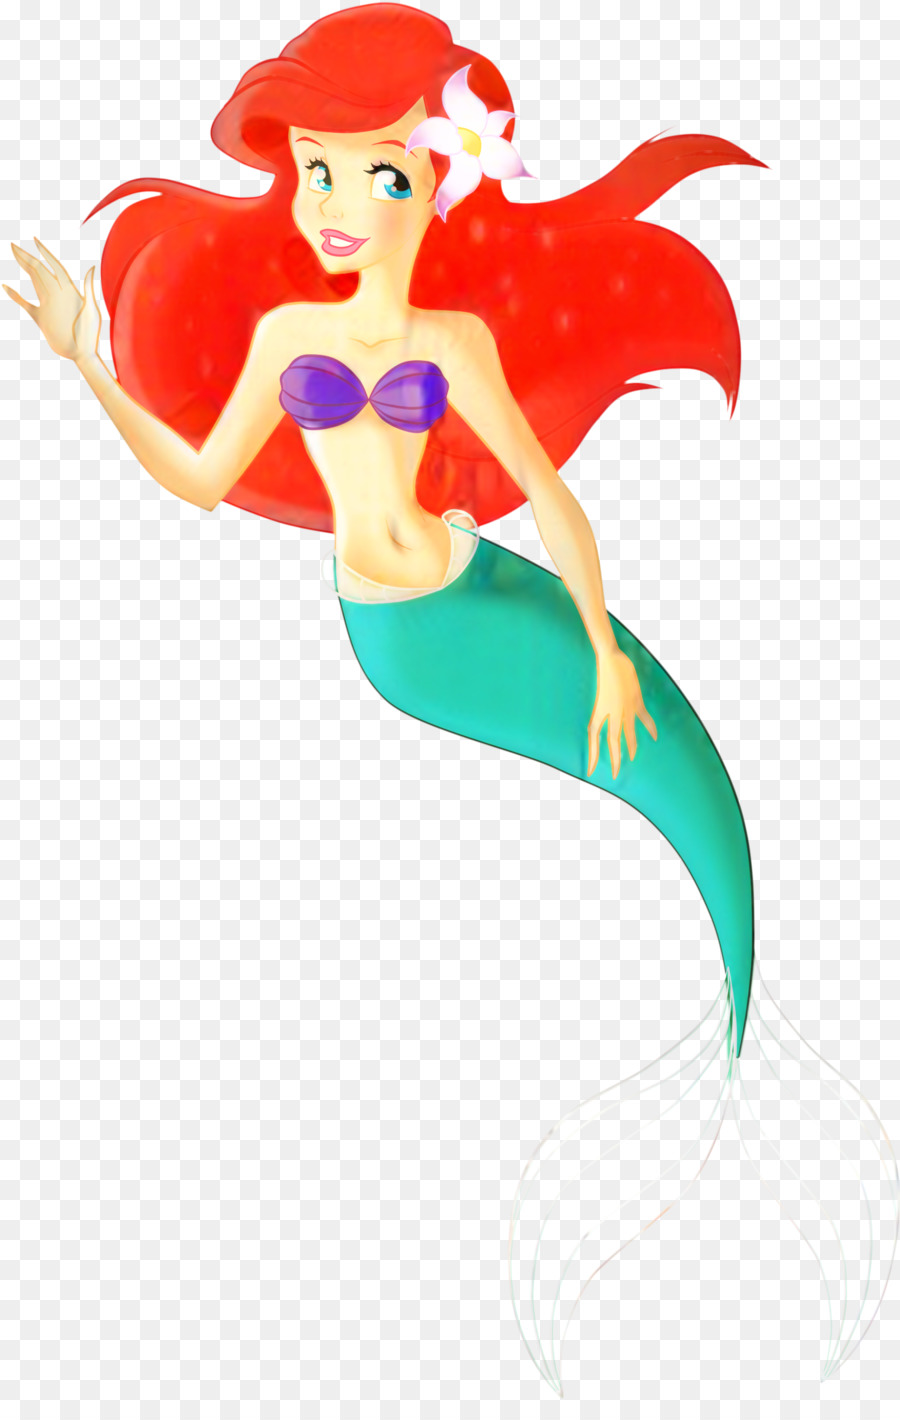 Ariel The Little Mermaid The Walt Disney Company Melody -  png download - 1518*2362 - Free Transparent Ariel png Download.